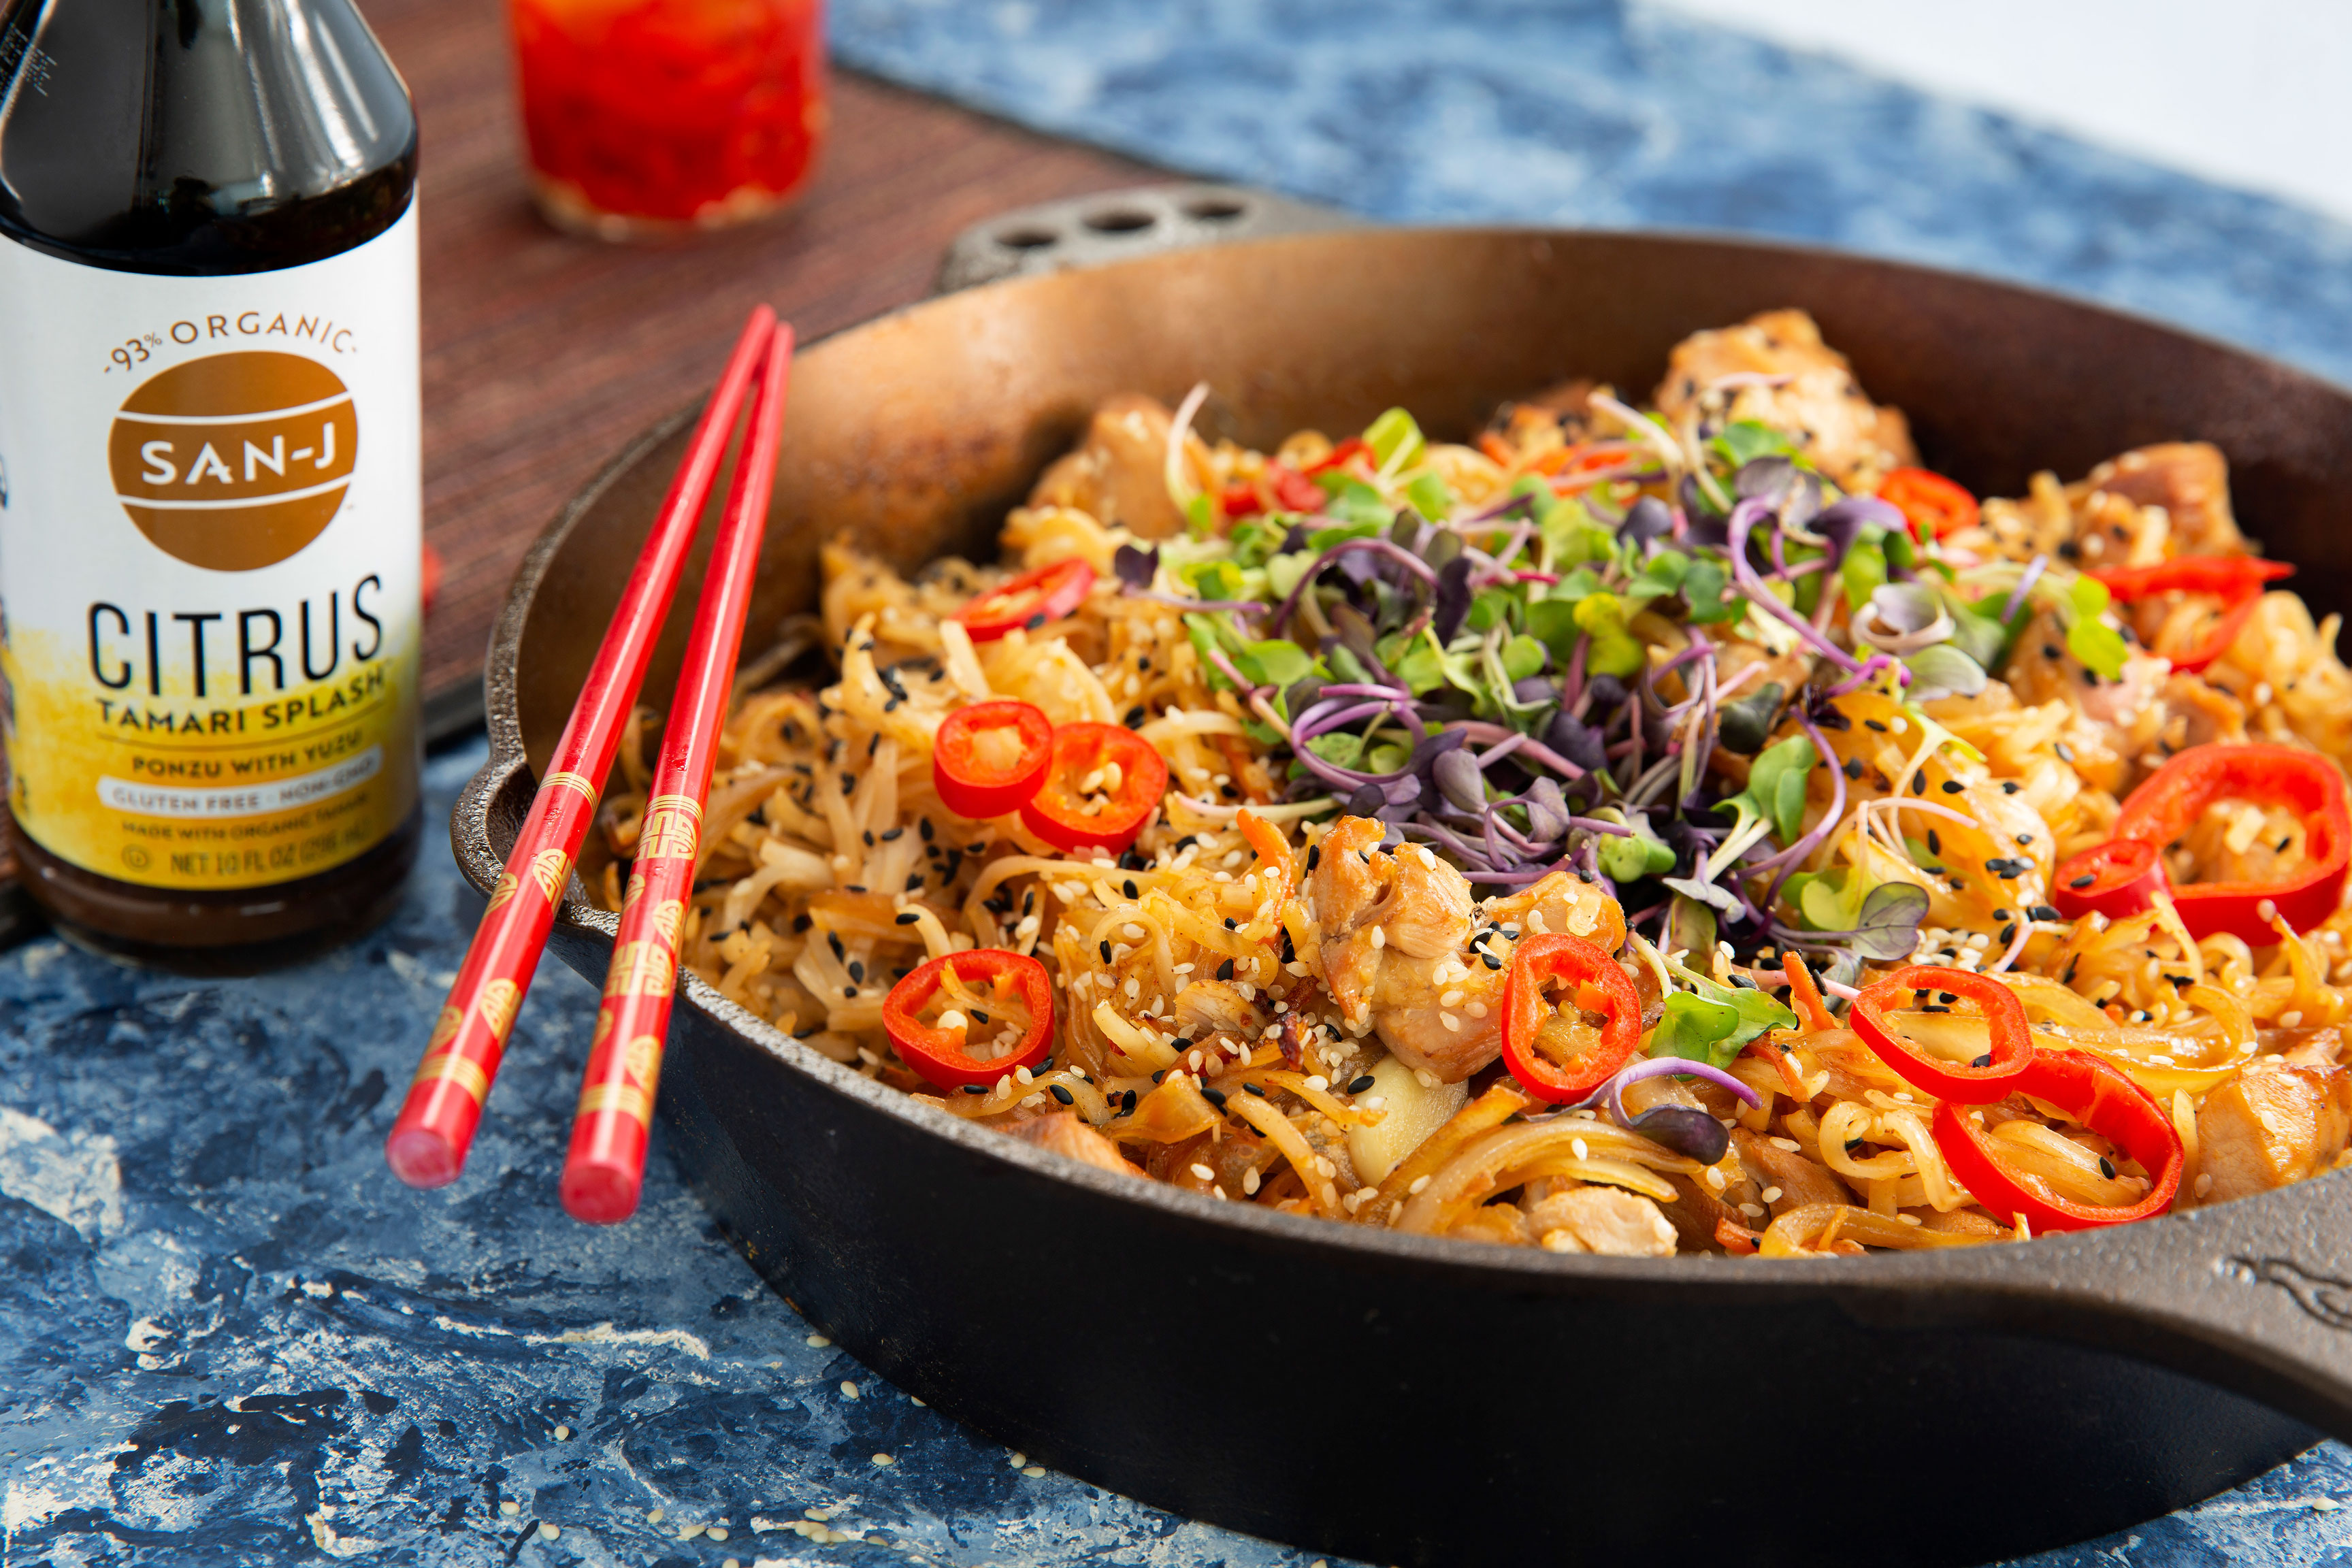 Spicy citrus chicken and noodles